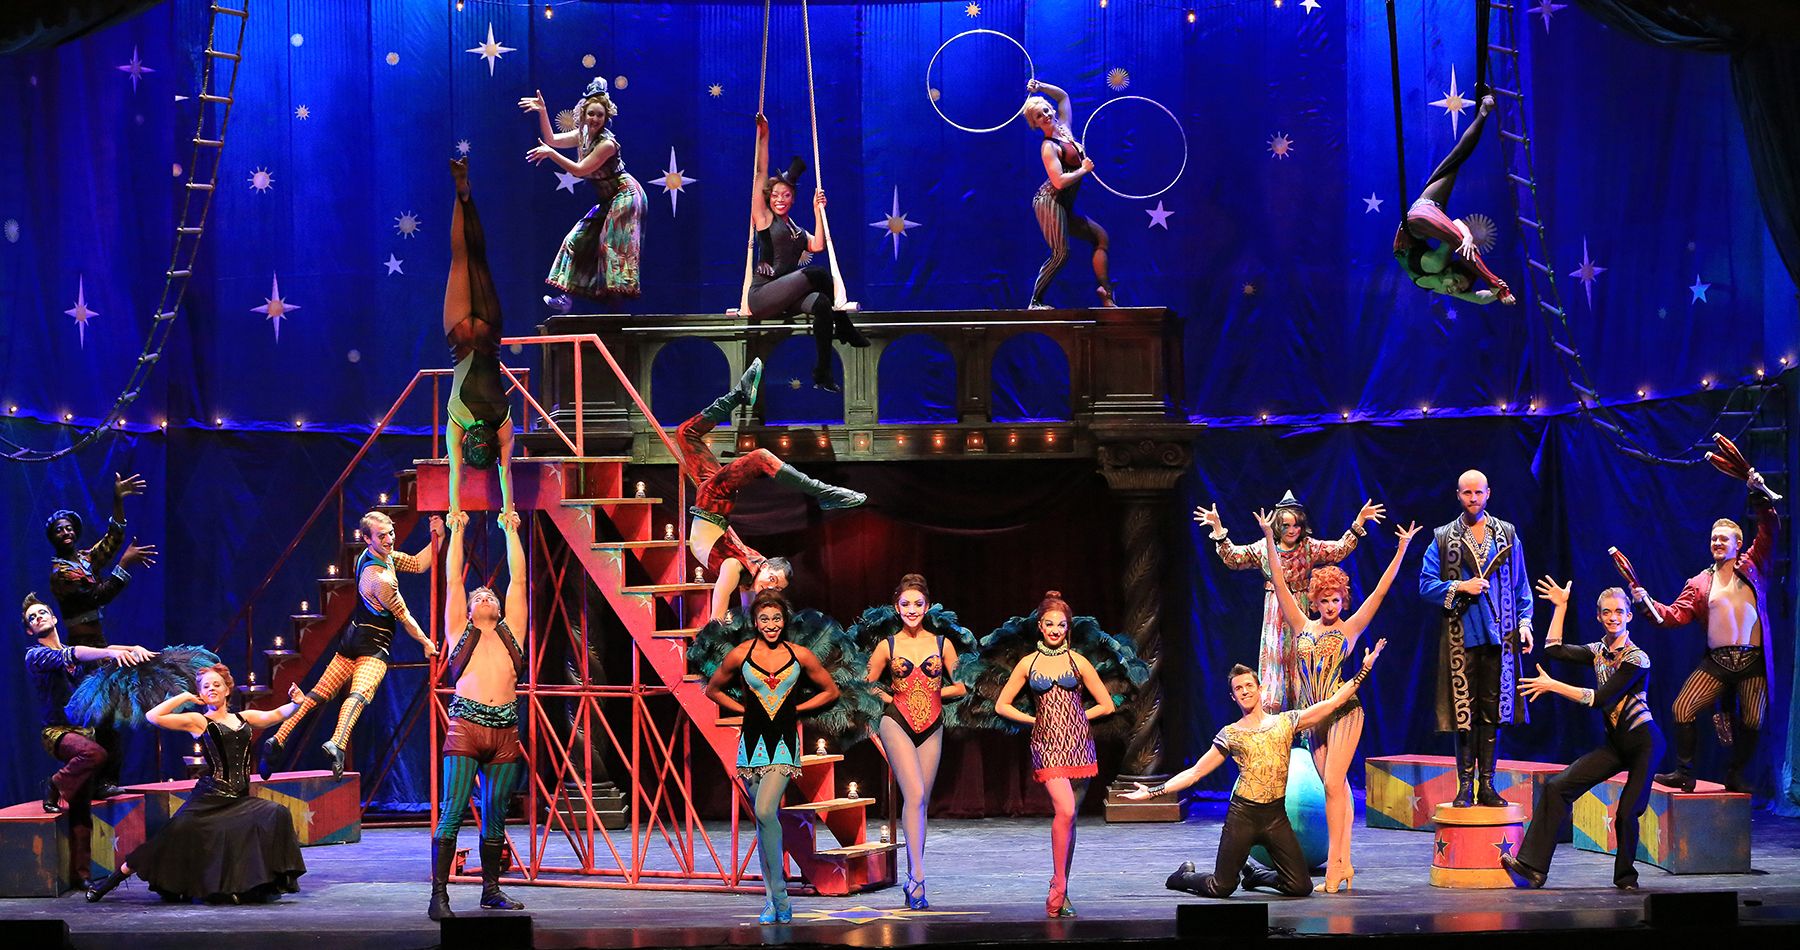 ‘Pippin’ play dates, times and ticket info | ArtSWFL.com